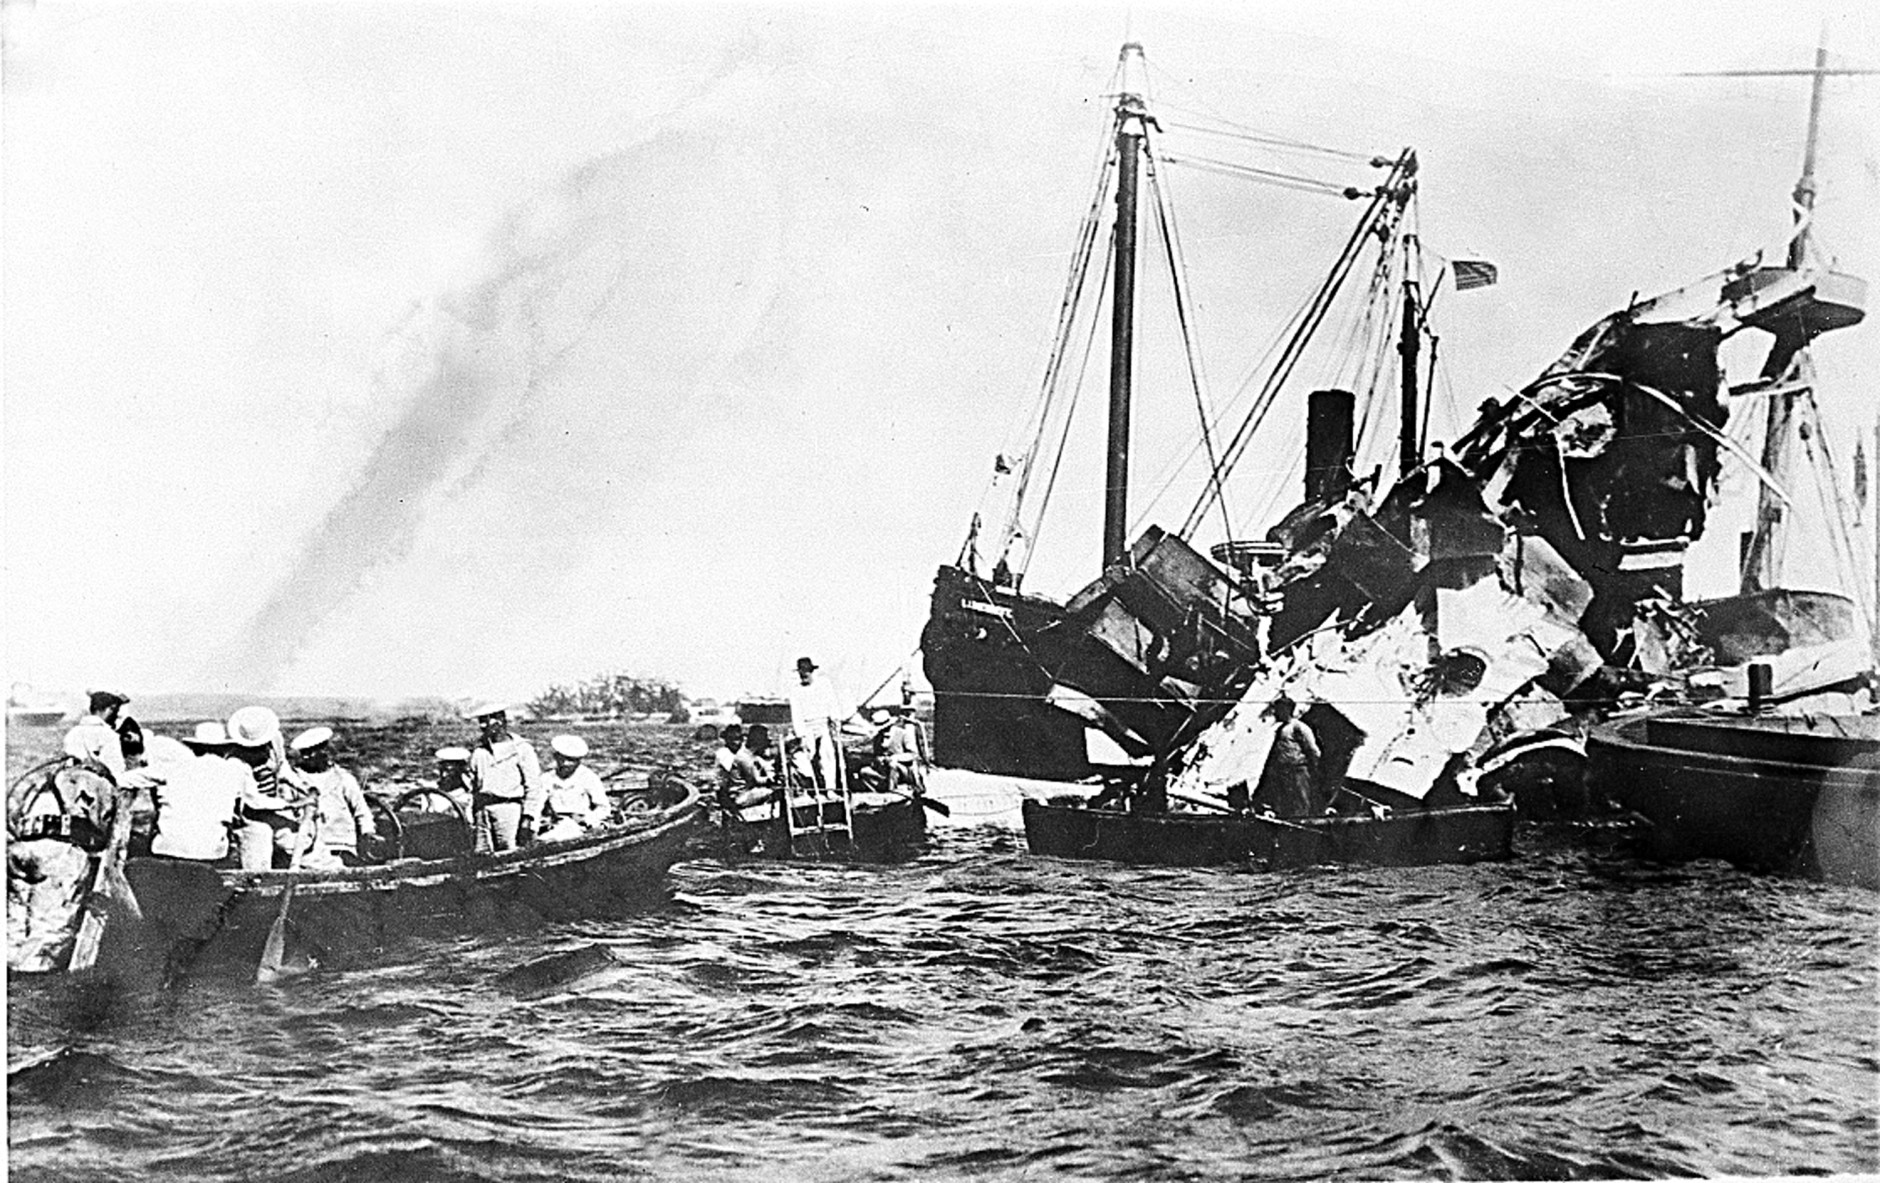 Lifeboats rescue surviving crewmen of the wrecked USS Maine after an underground explosion destroyed the battleship on the night of Feb. 15 as it was anchored in the Havana harbor, Cuba, in 1898.  About 260 U.S. Naval personnel were killed in the explosion.  The sinking of the U.S. warship was a catalyst for the outbreak of the Spanish-American War and the U.S. officially waged war on April 25.  (AP Photo)